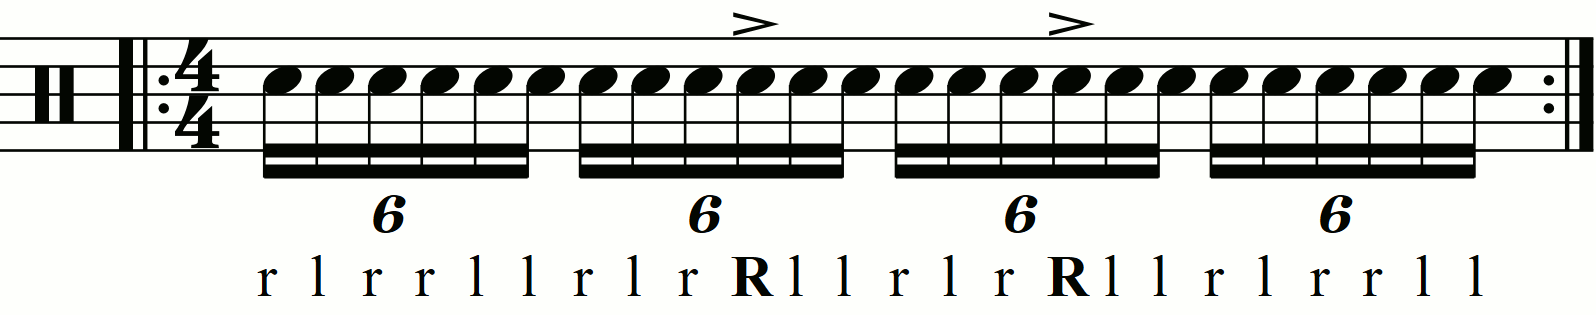 Accenting a paradiddle diddle